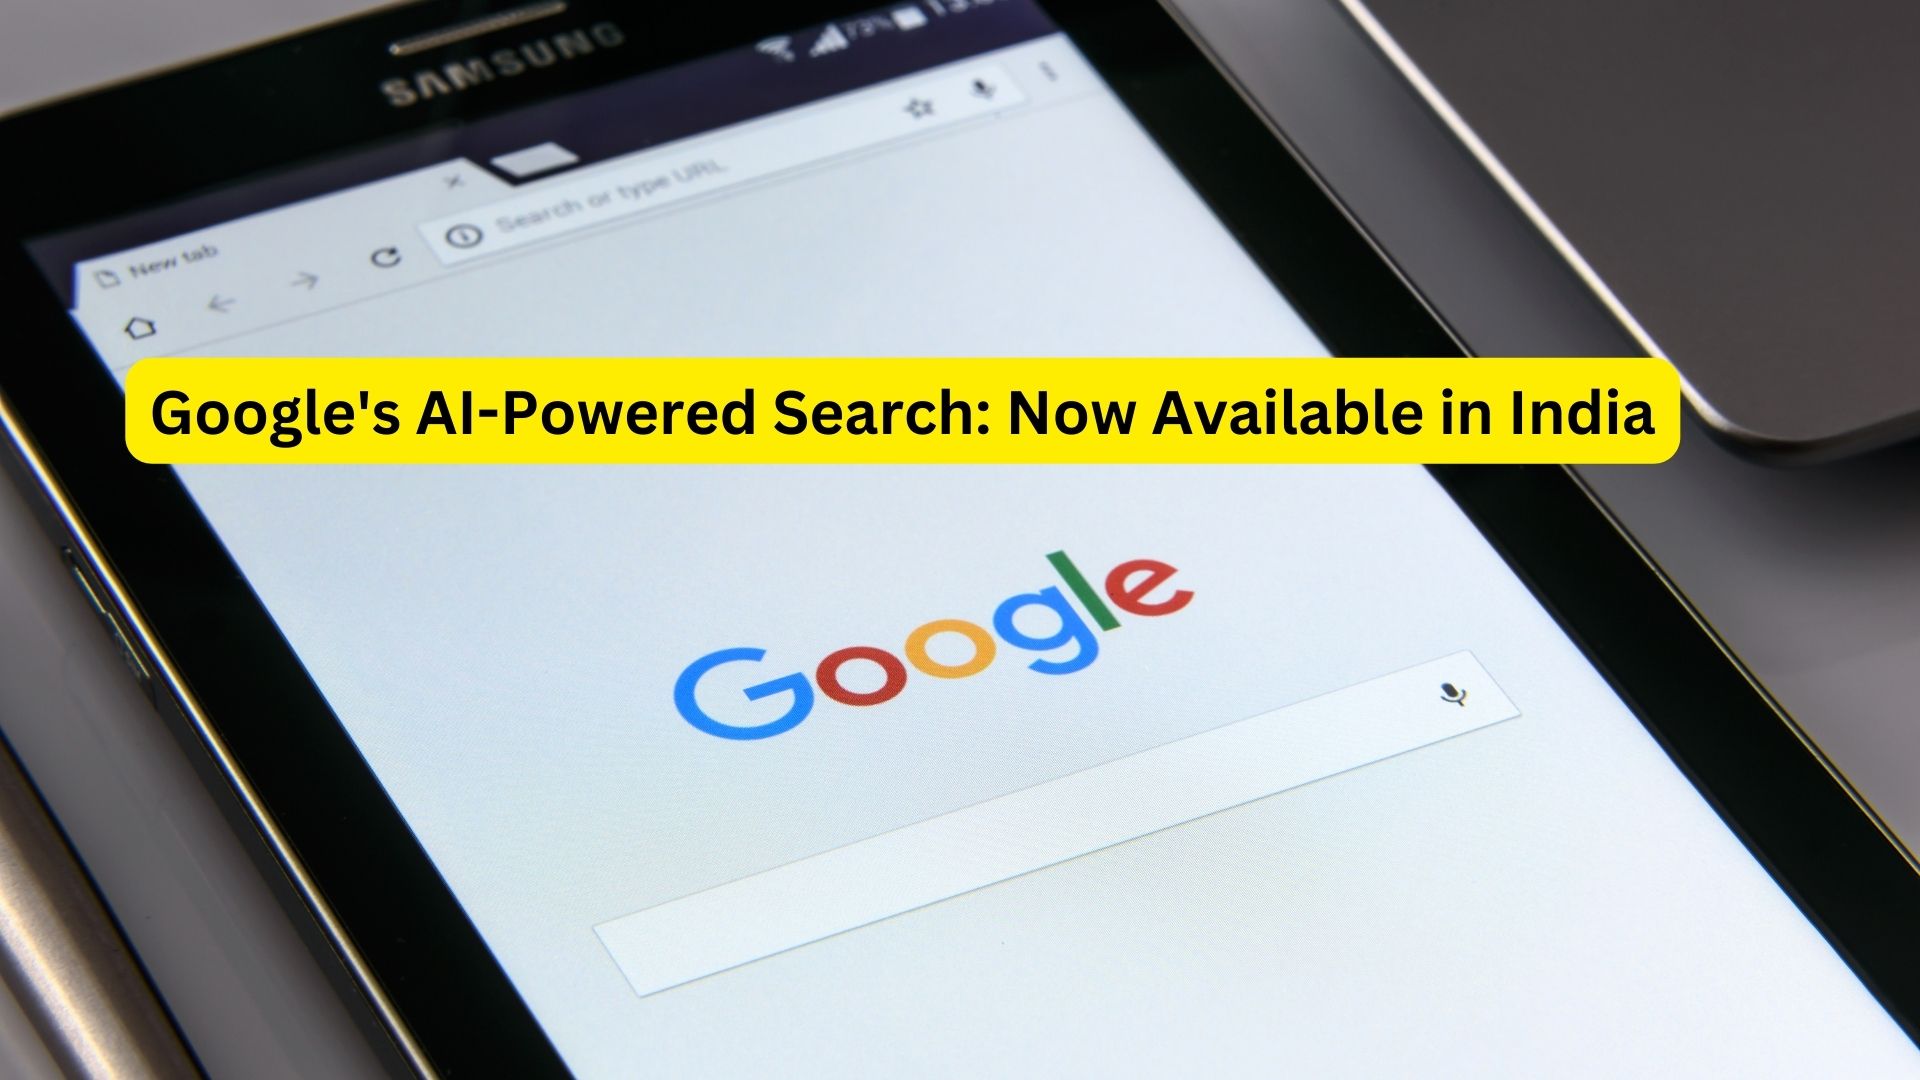 Google's AI-Powered Search: Now Available in India